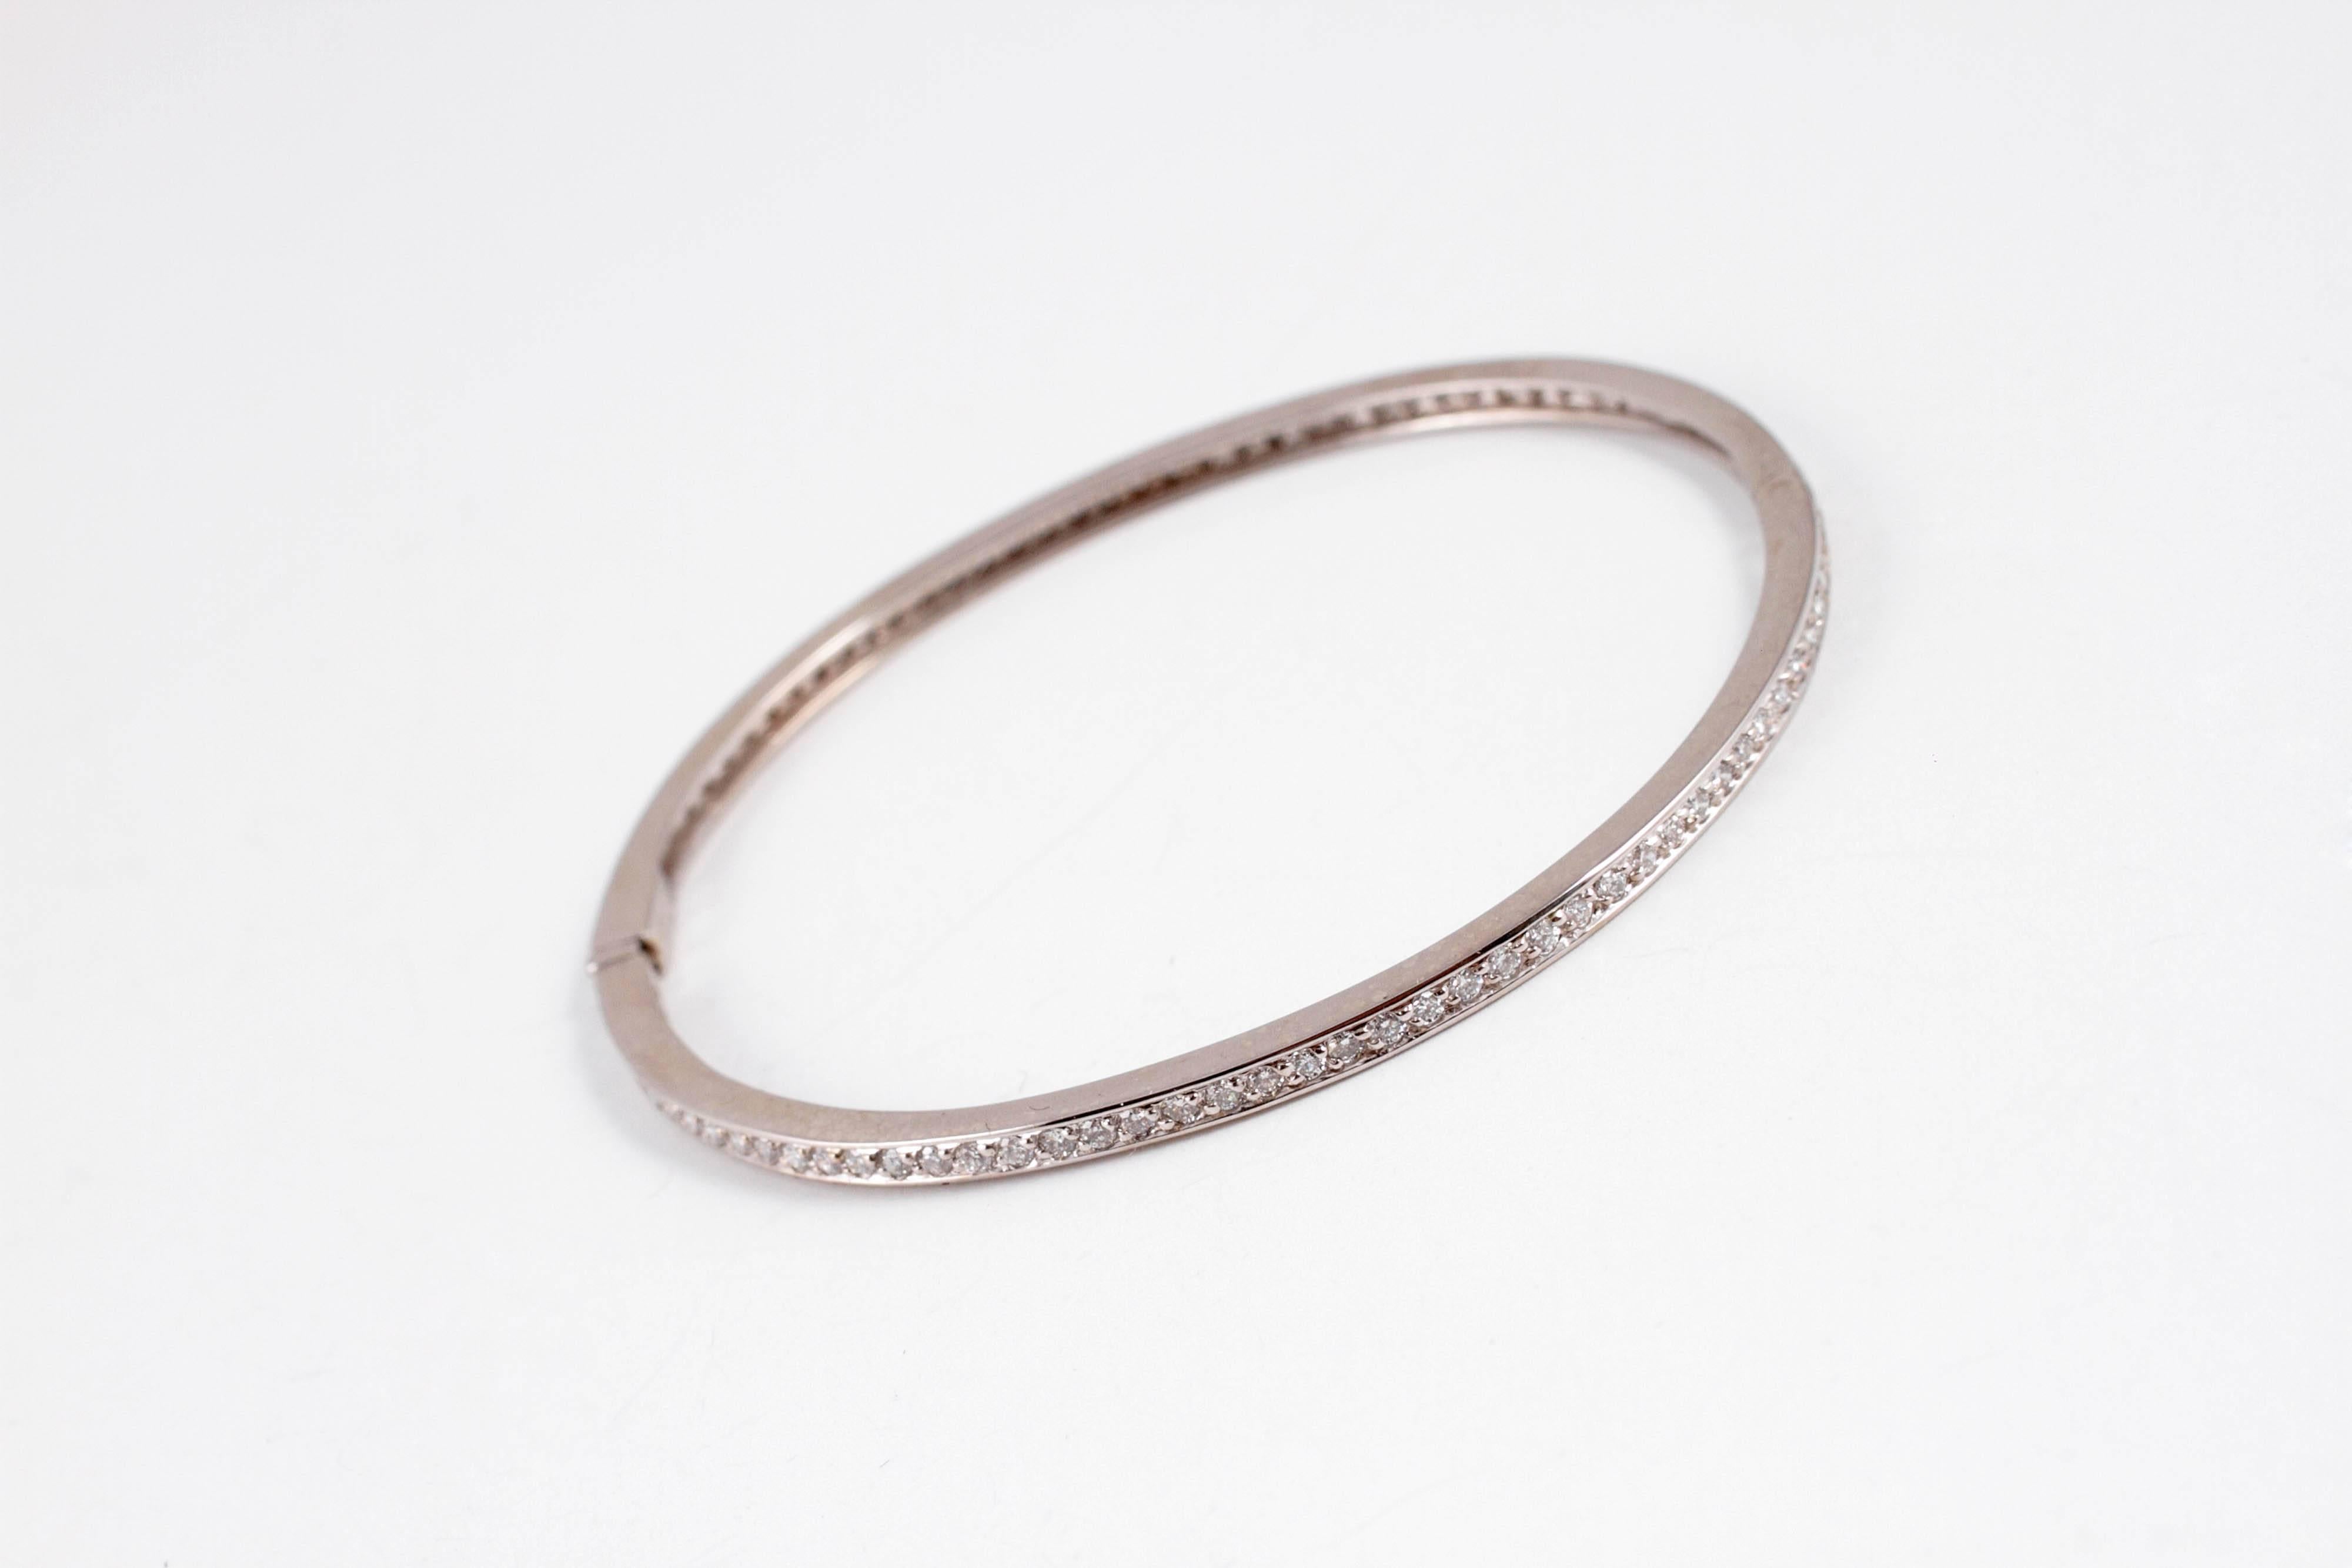 Layer this fun bangle, or wear it alone!  Light on the wrist, in 14 karat white gold.